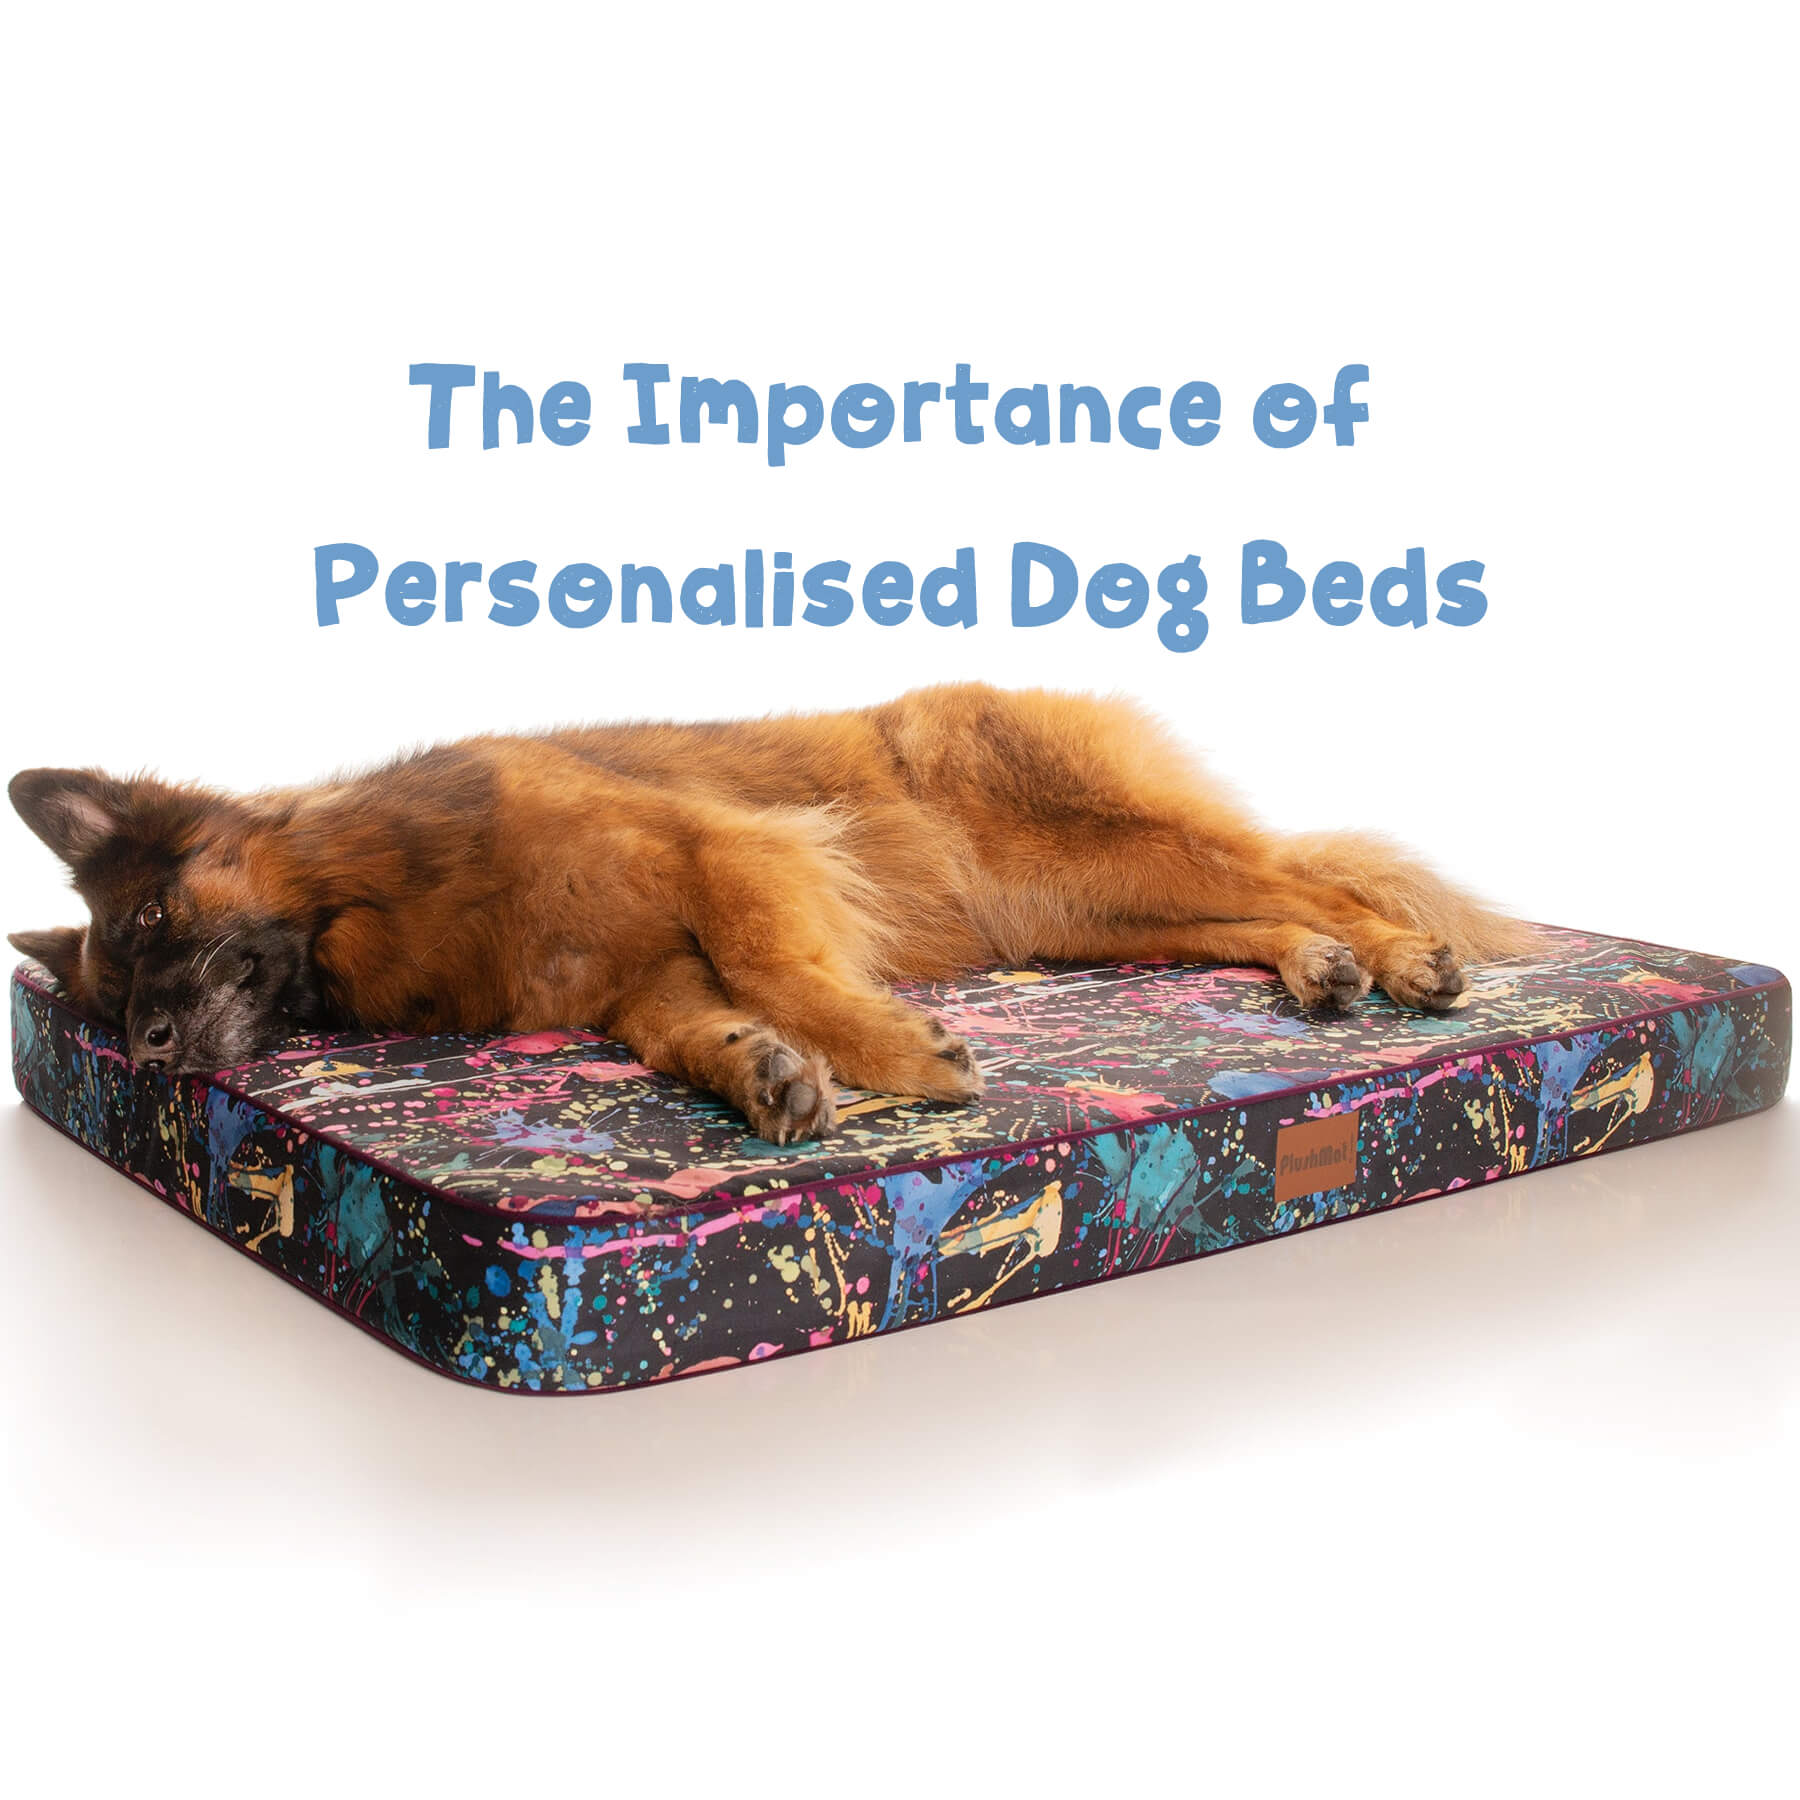 dog lying on a personalised dog bed